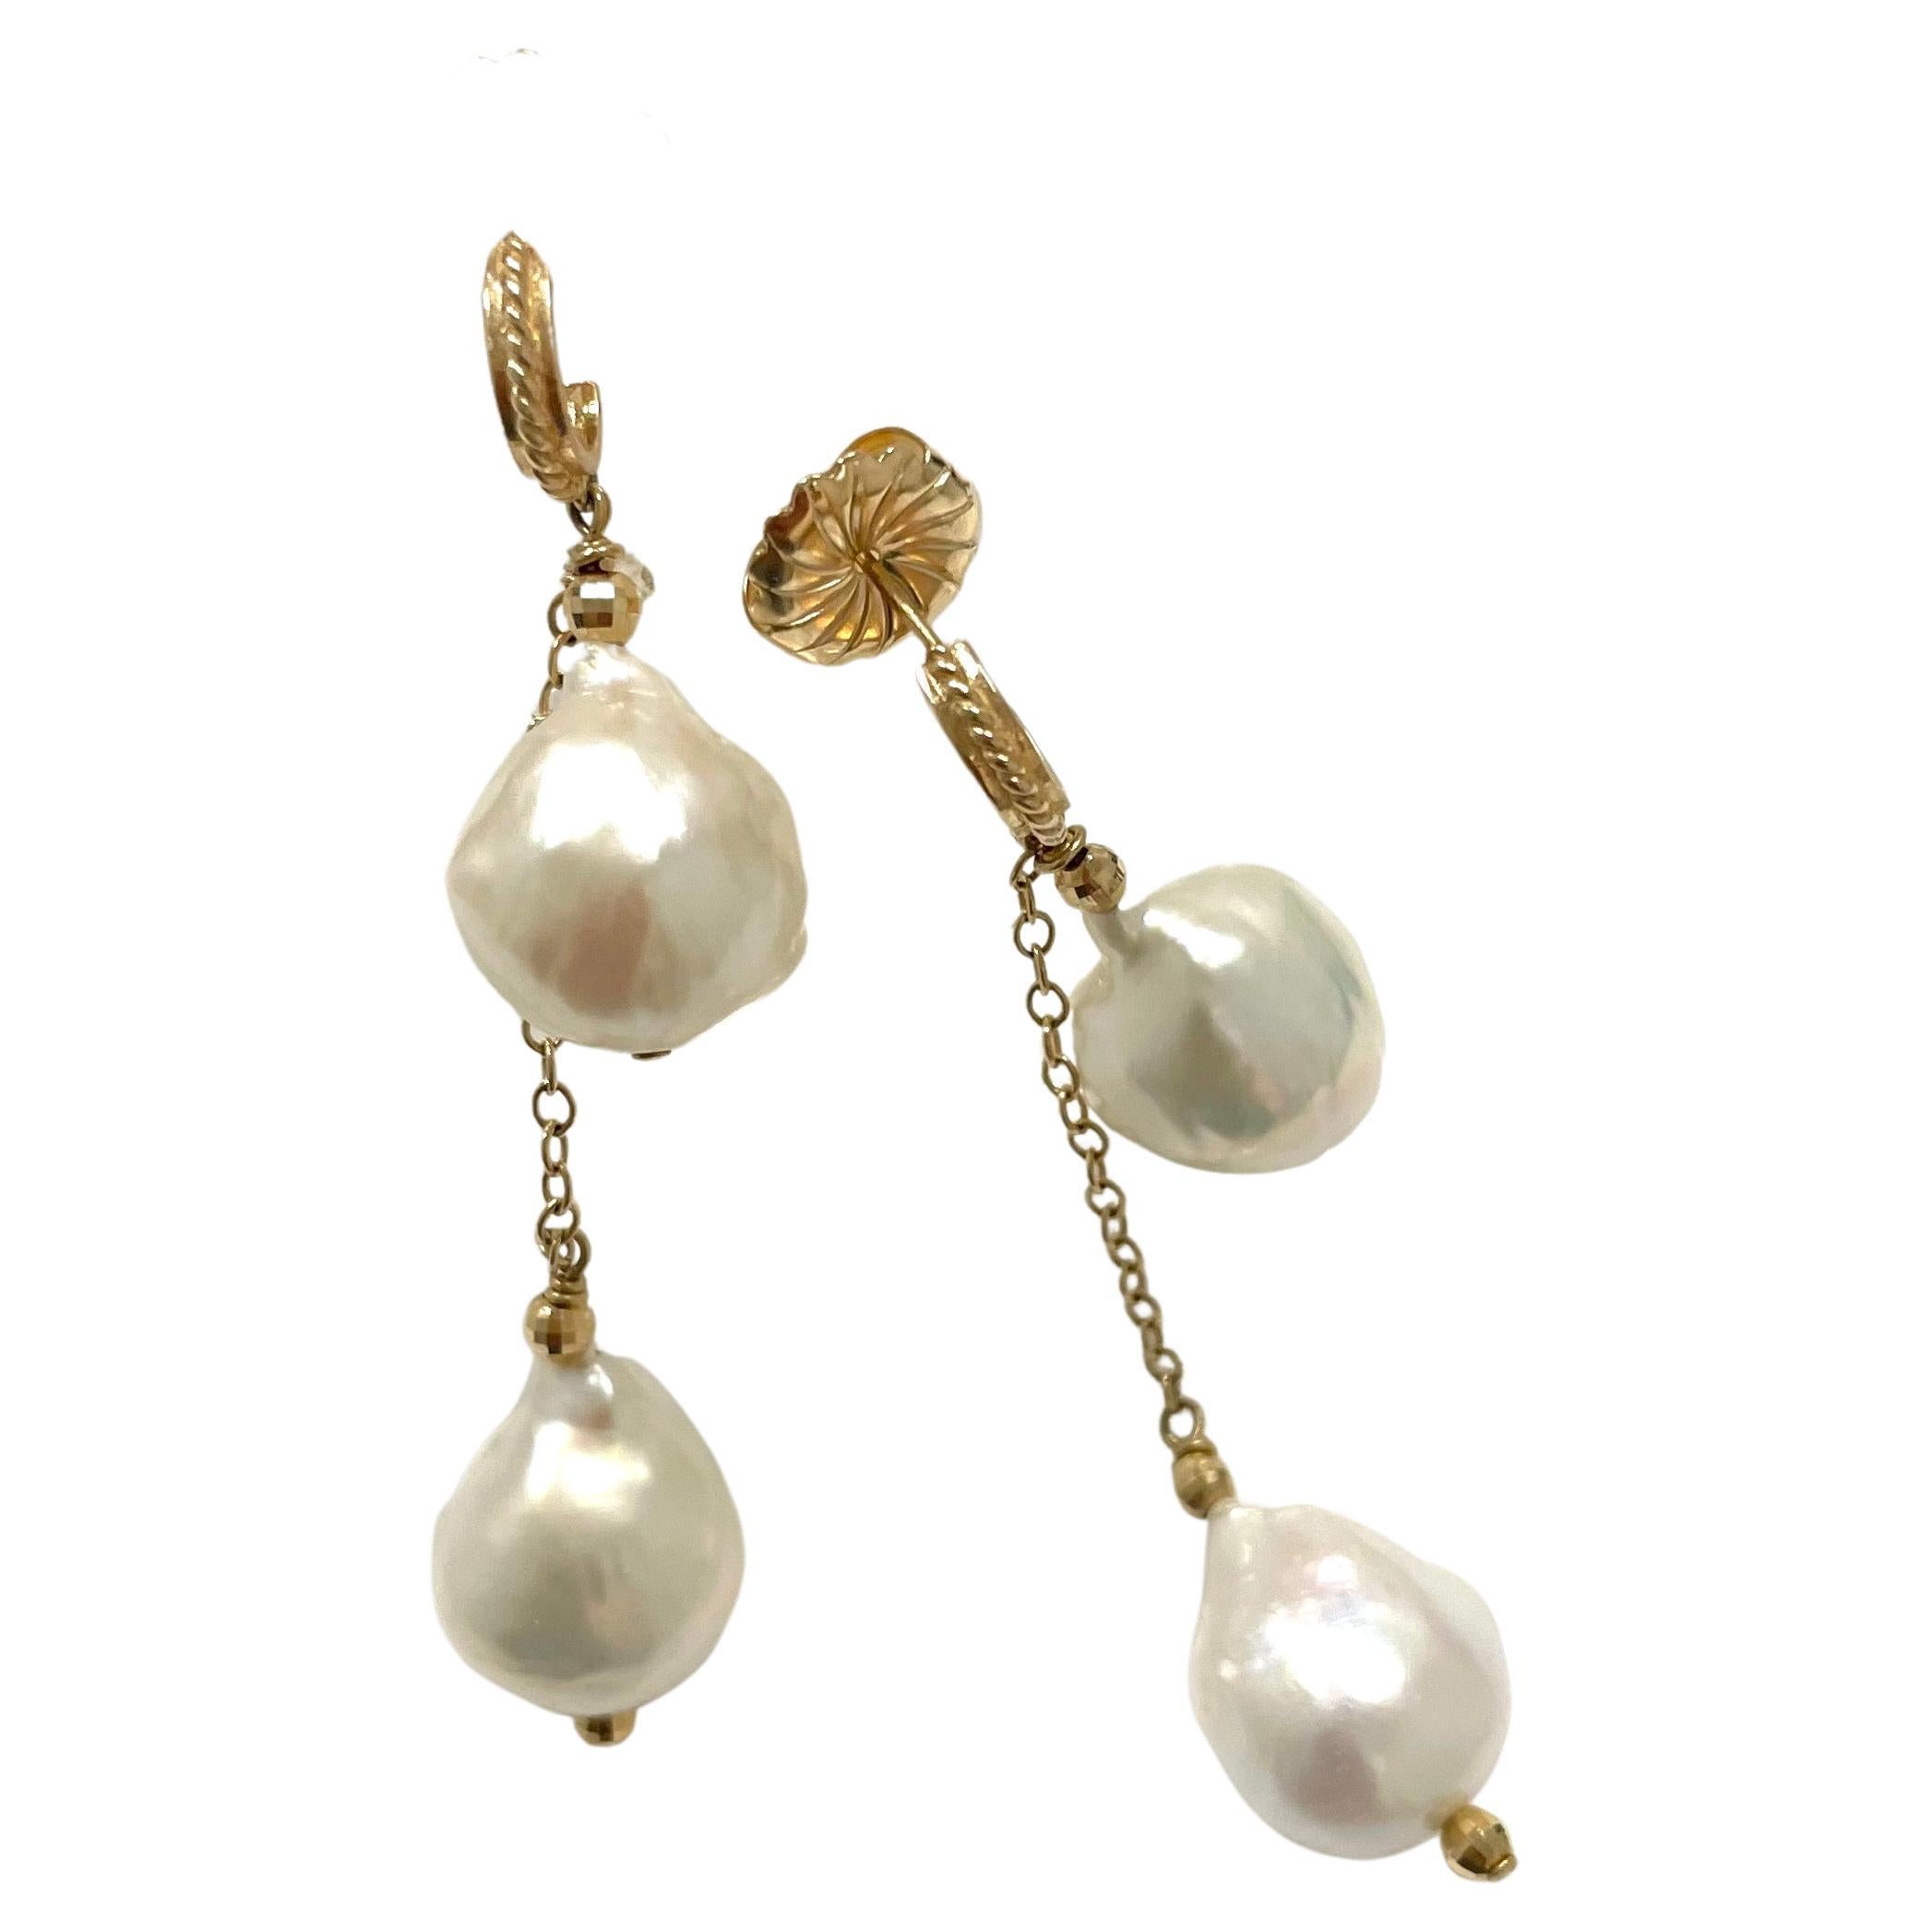 Description
Beautiful, large 12 to 13 mm, lustrous white semi-baroque nucleated freshwater pearls suspended from a yellow gold chain and a half hoop textured post creating a unique harmonized two drop style earring.
 Item # E2072

Materials and